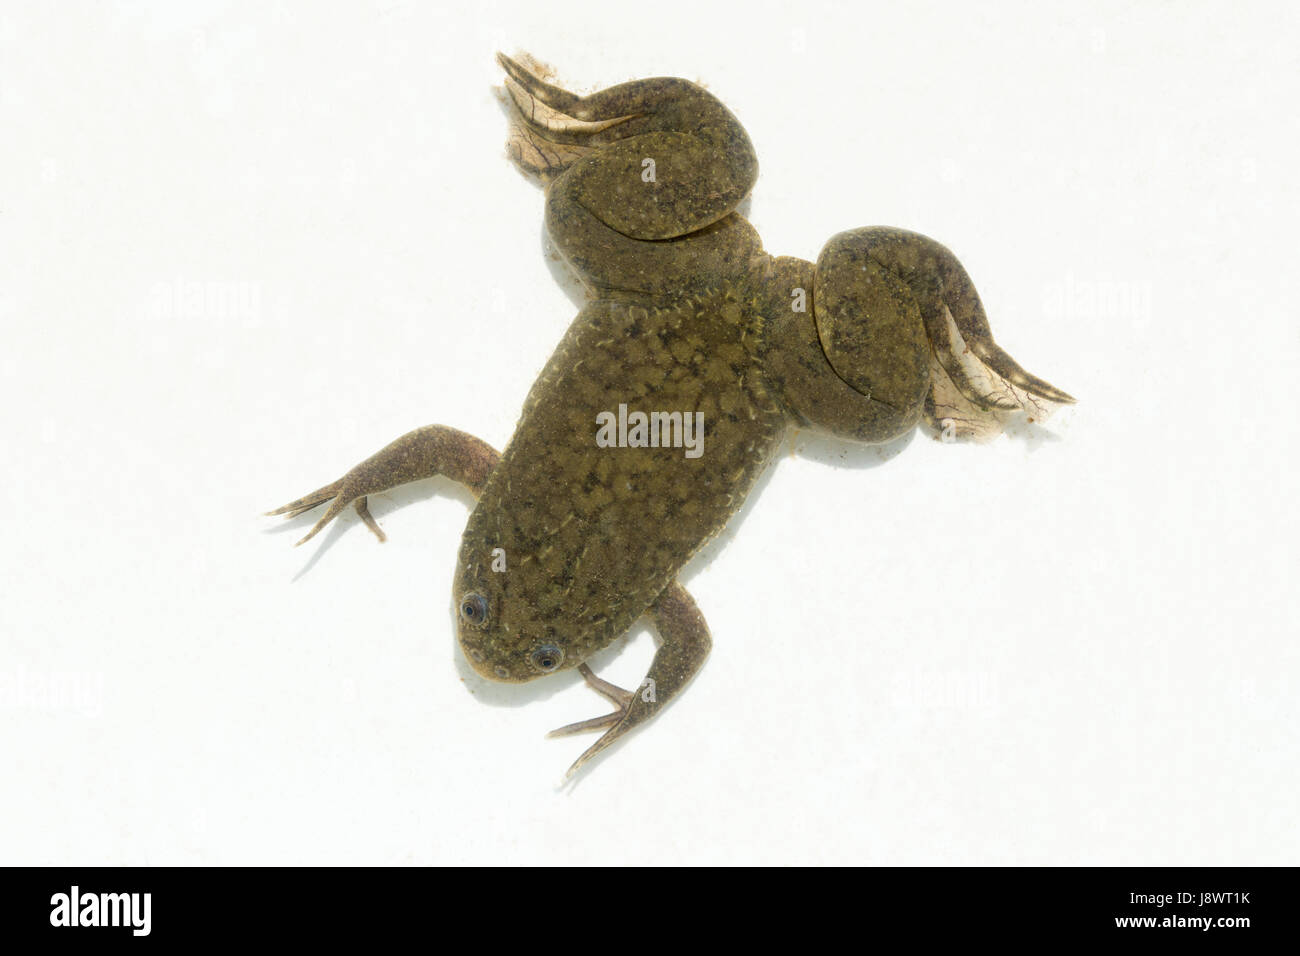 African Clawed Frog Xenopus laevis. Dorsal view. Under water. Aquatic. Stock Photo